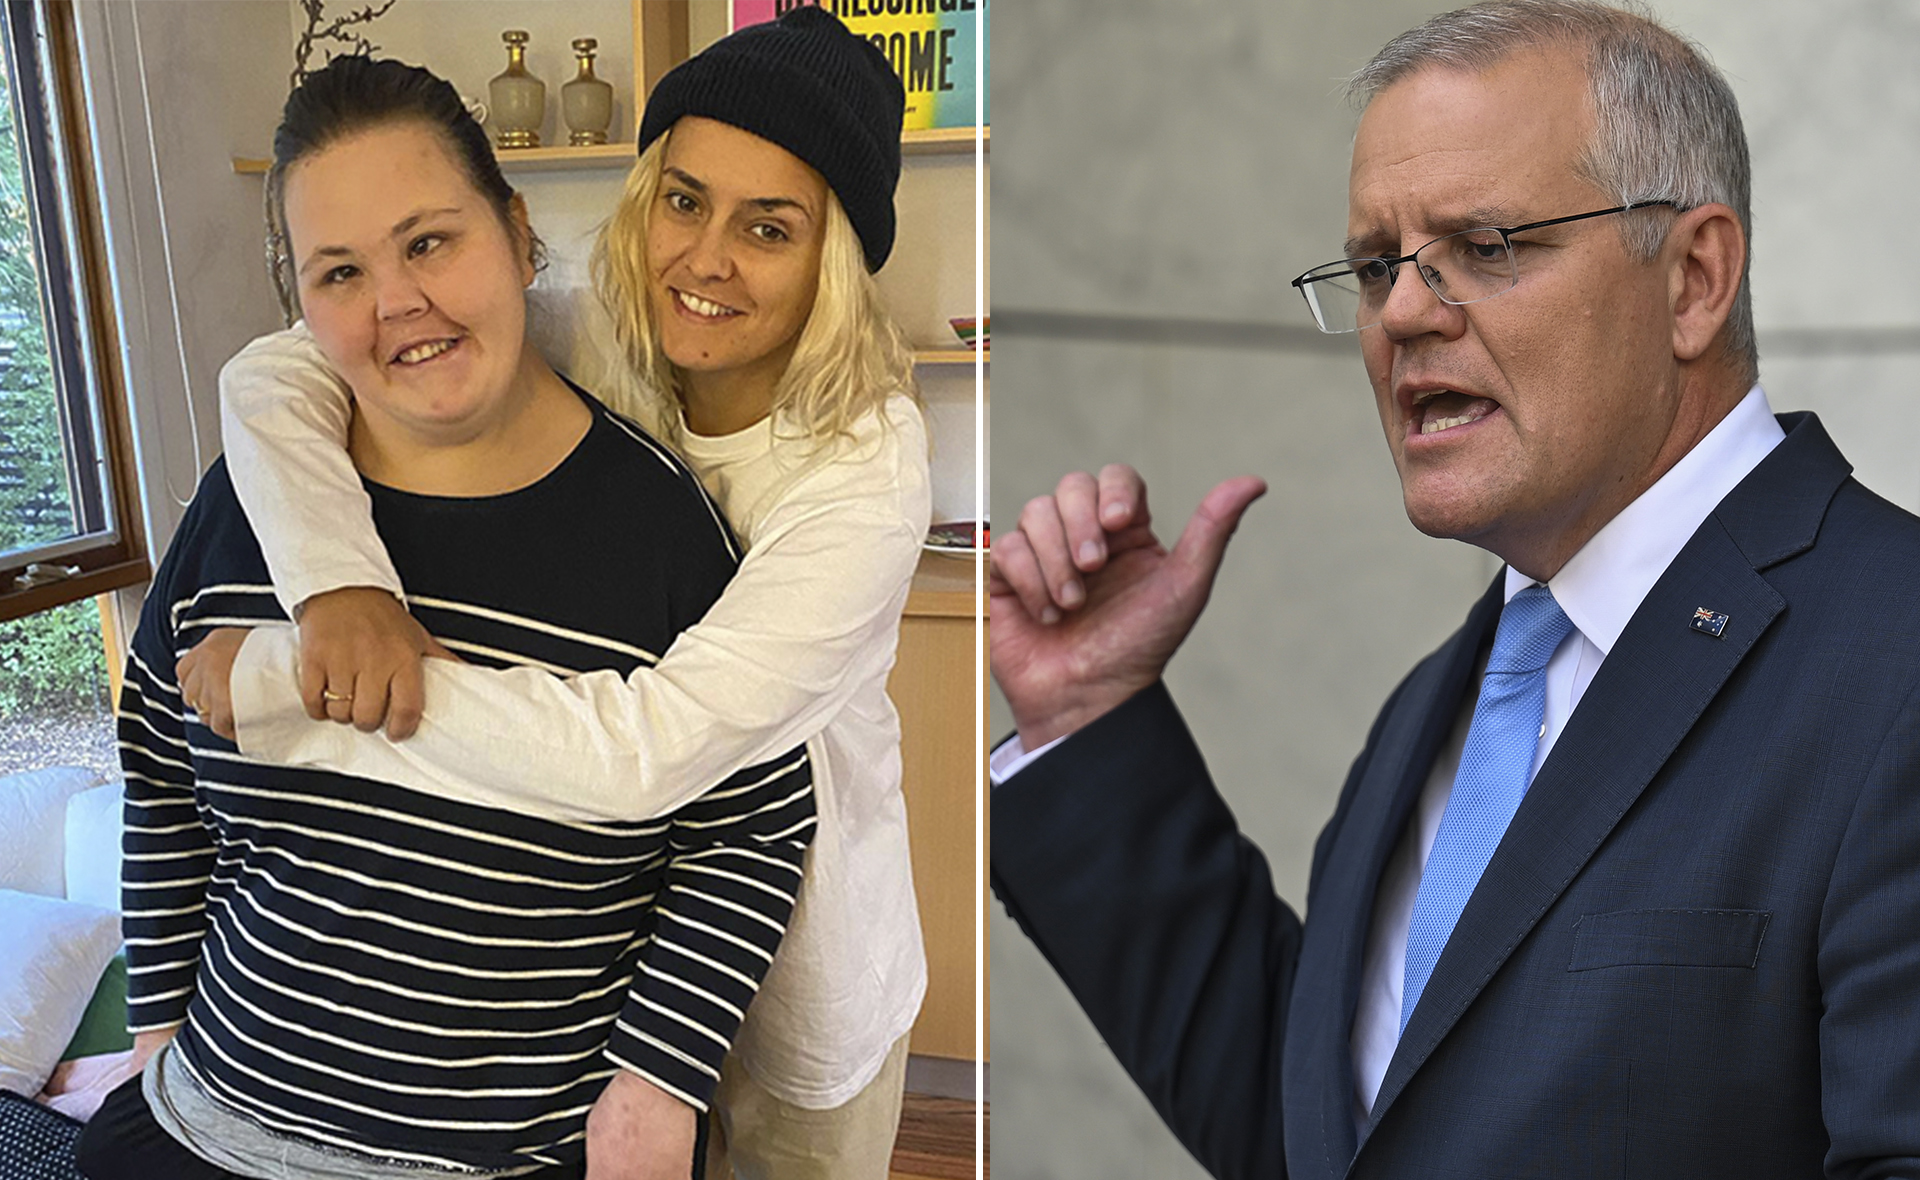 “No social skills, no awareness”: Survivor star Moana Hope slams Scott Morrison for his comments about people with disabilities